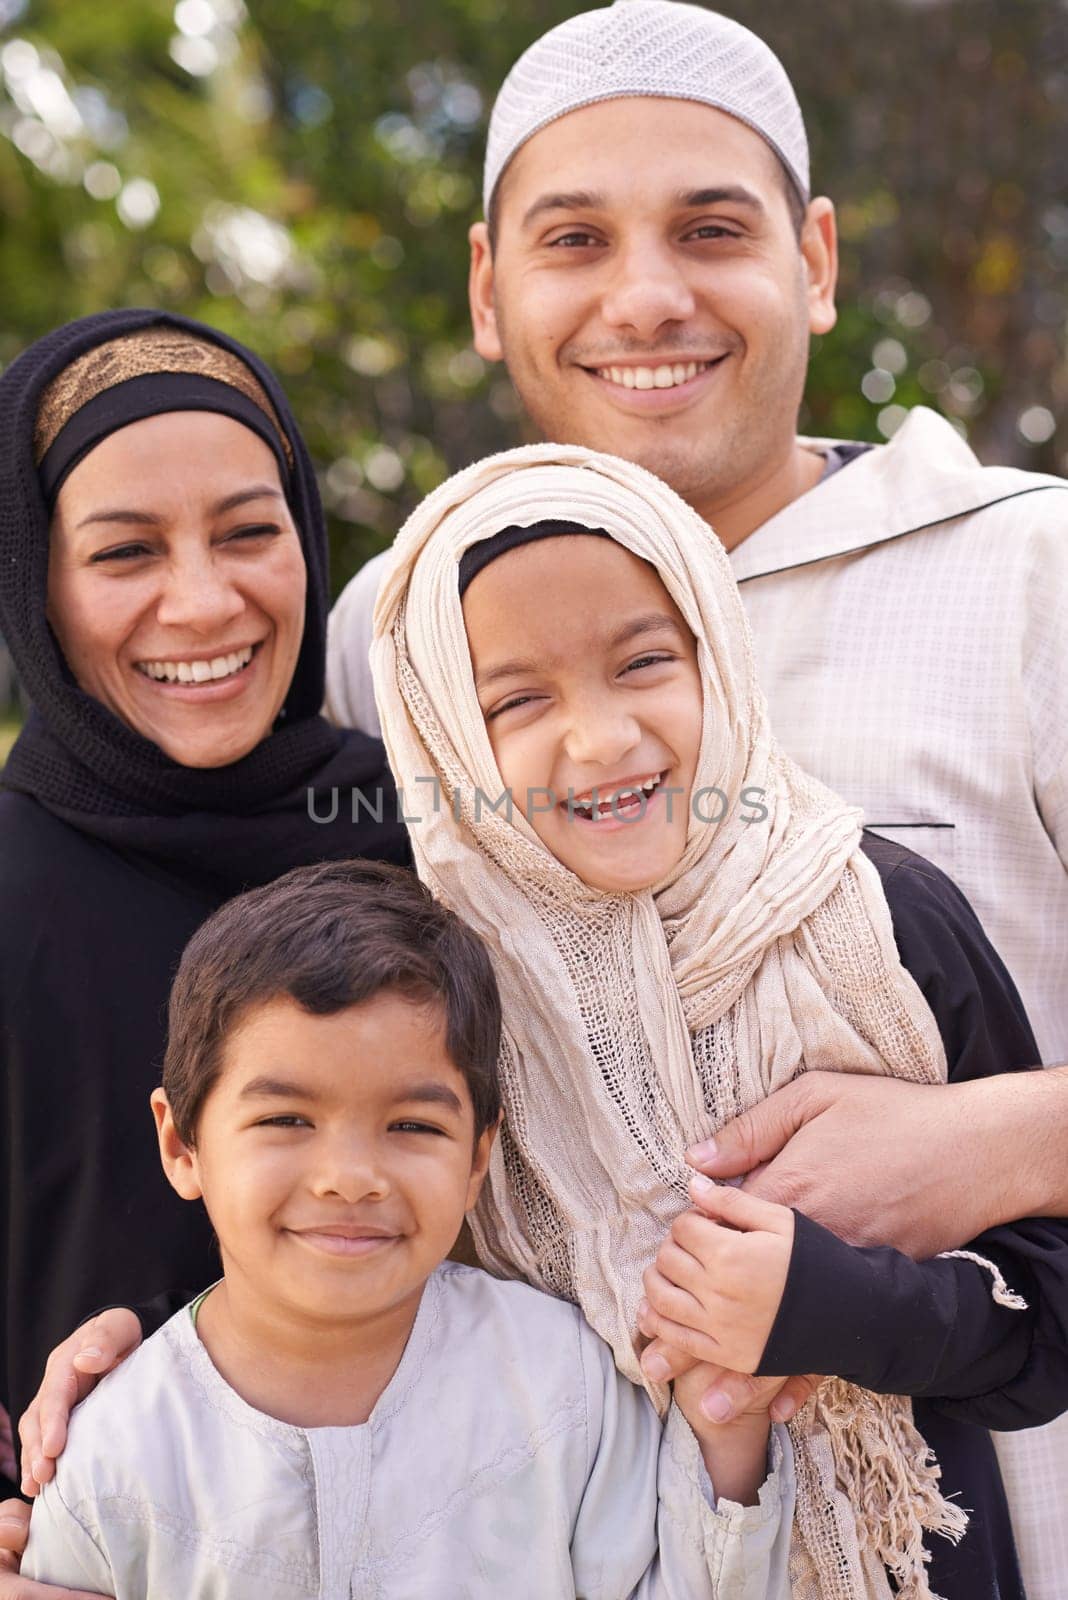 Park, muslim family and portrait of parents with children for bonding, ramadan and outdoors together. Islam, happy people and mother or father with kids for love, childcare and support in nature.